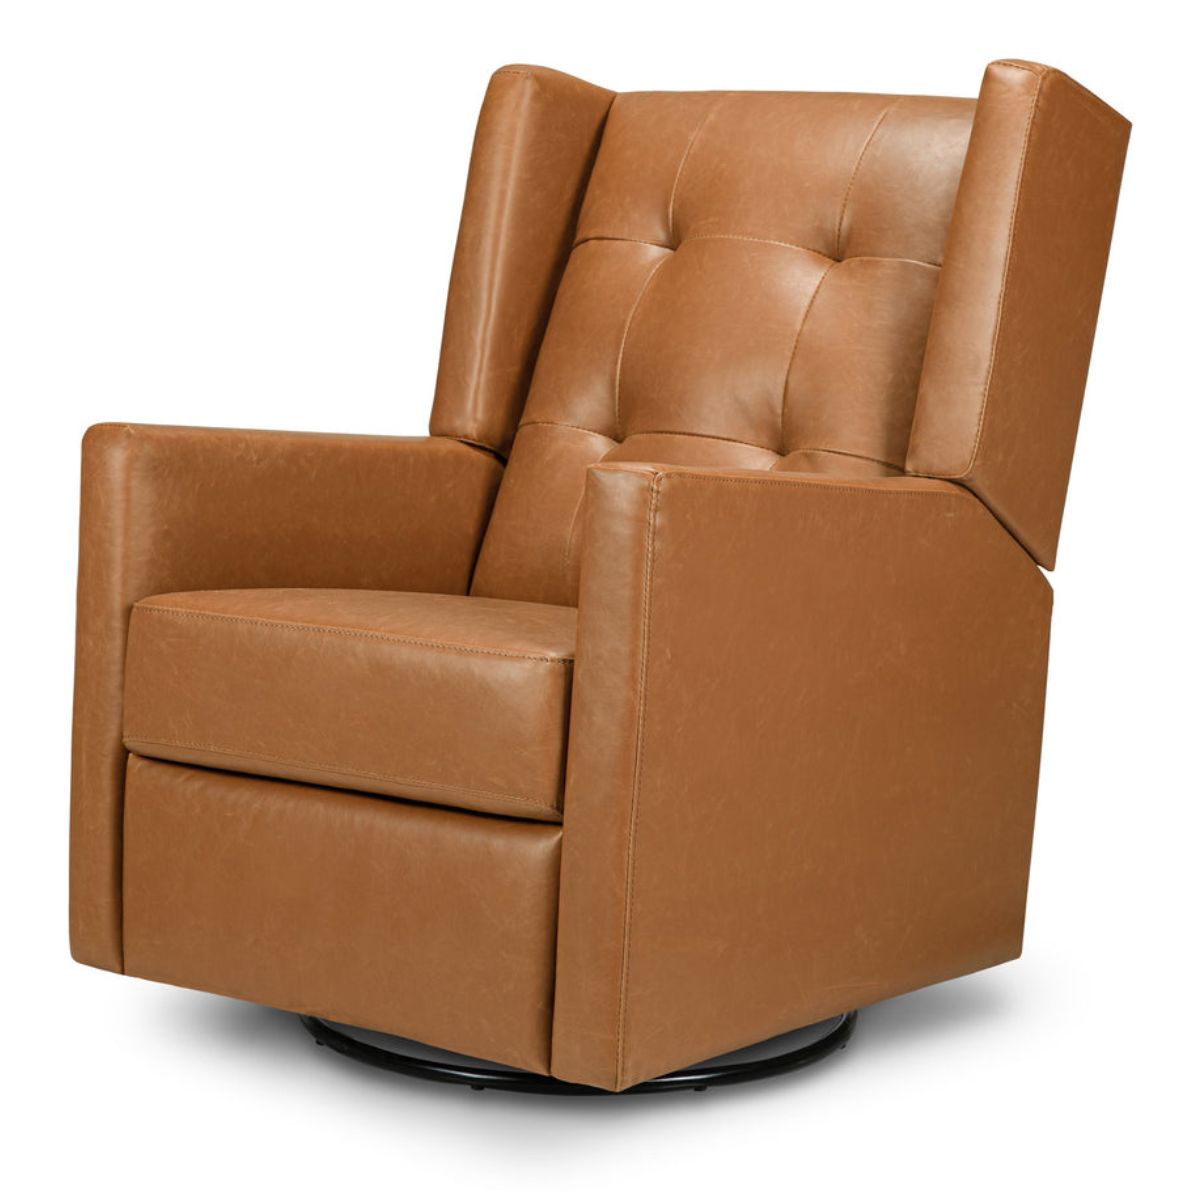 DaVinci Maddox Recliner and Swivel Glider | The Baby Cubby